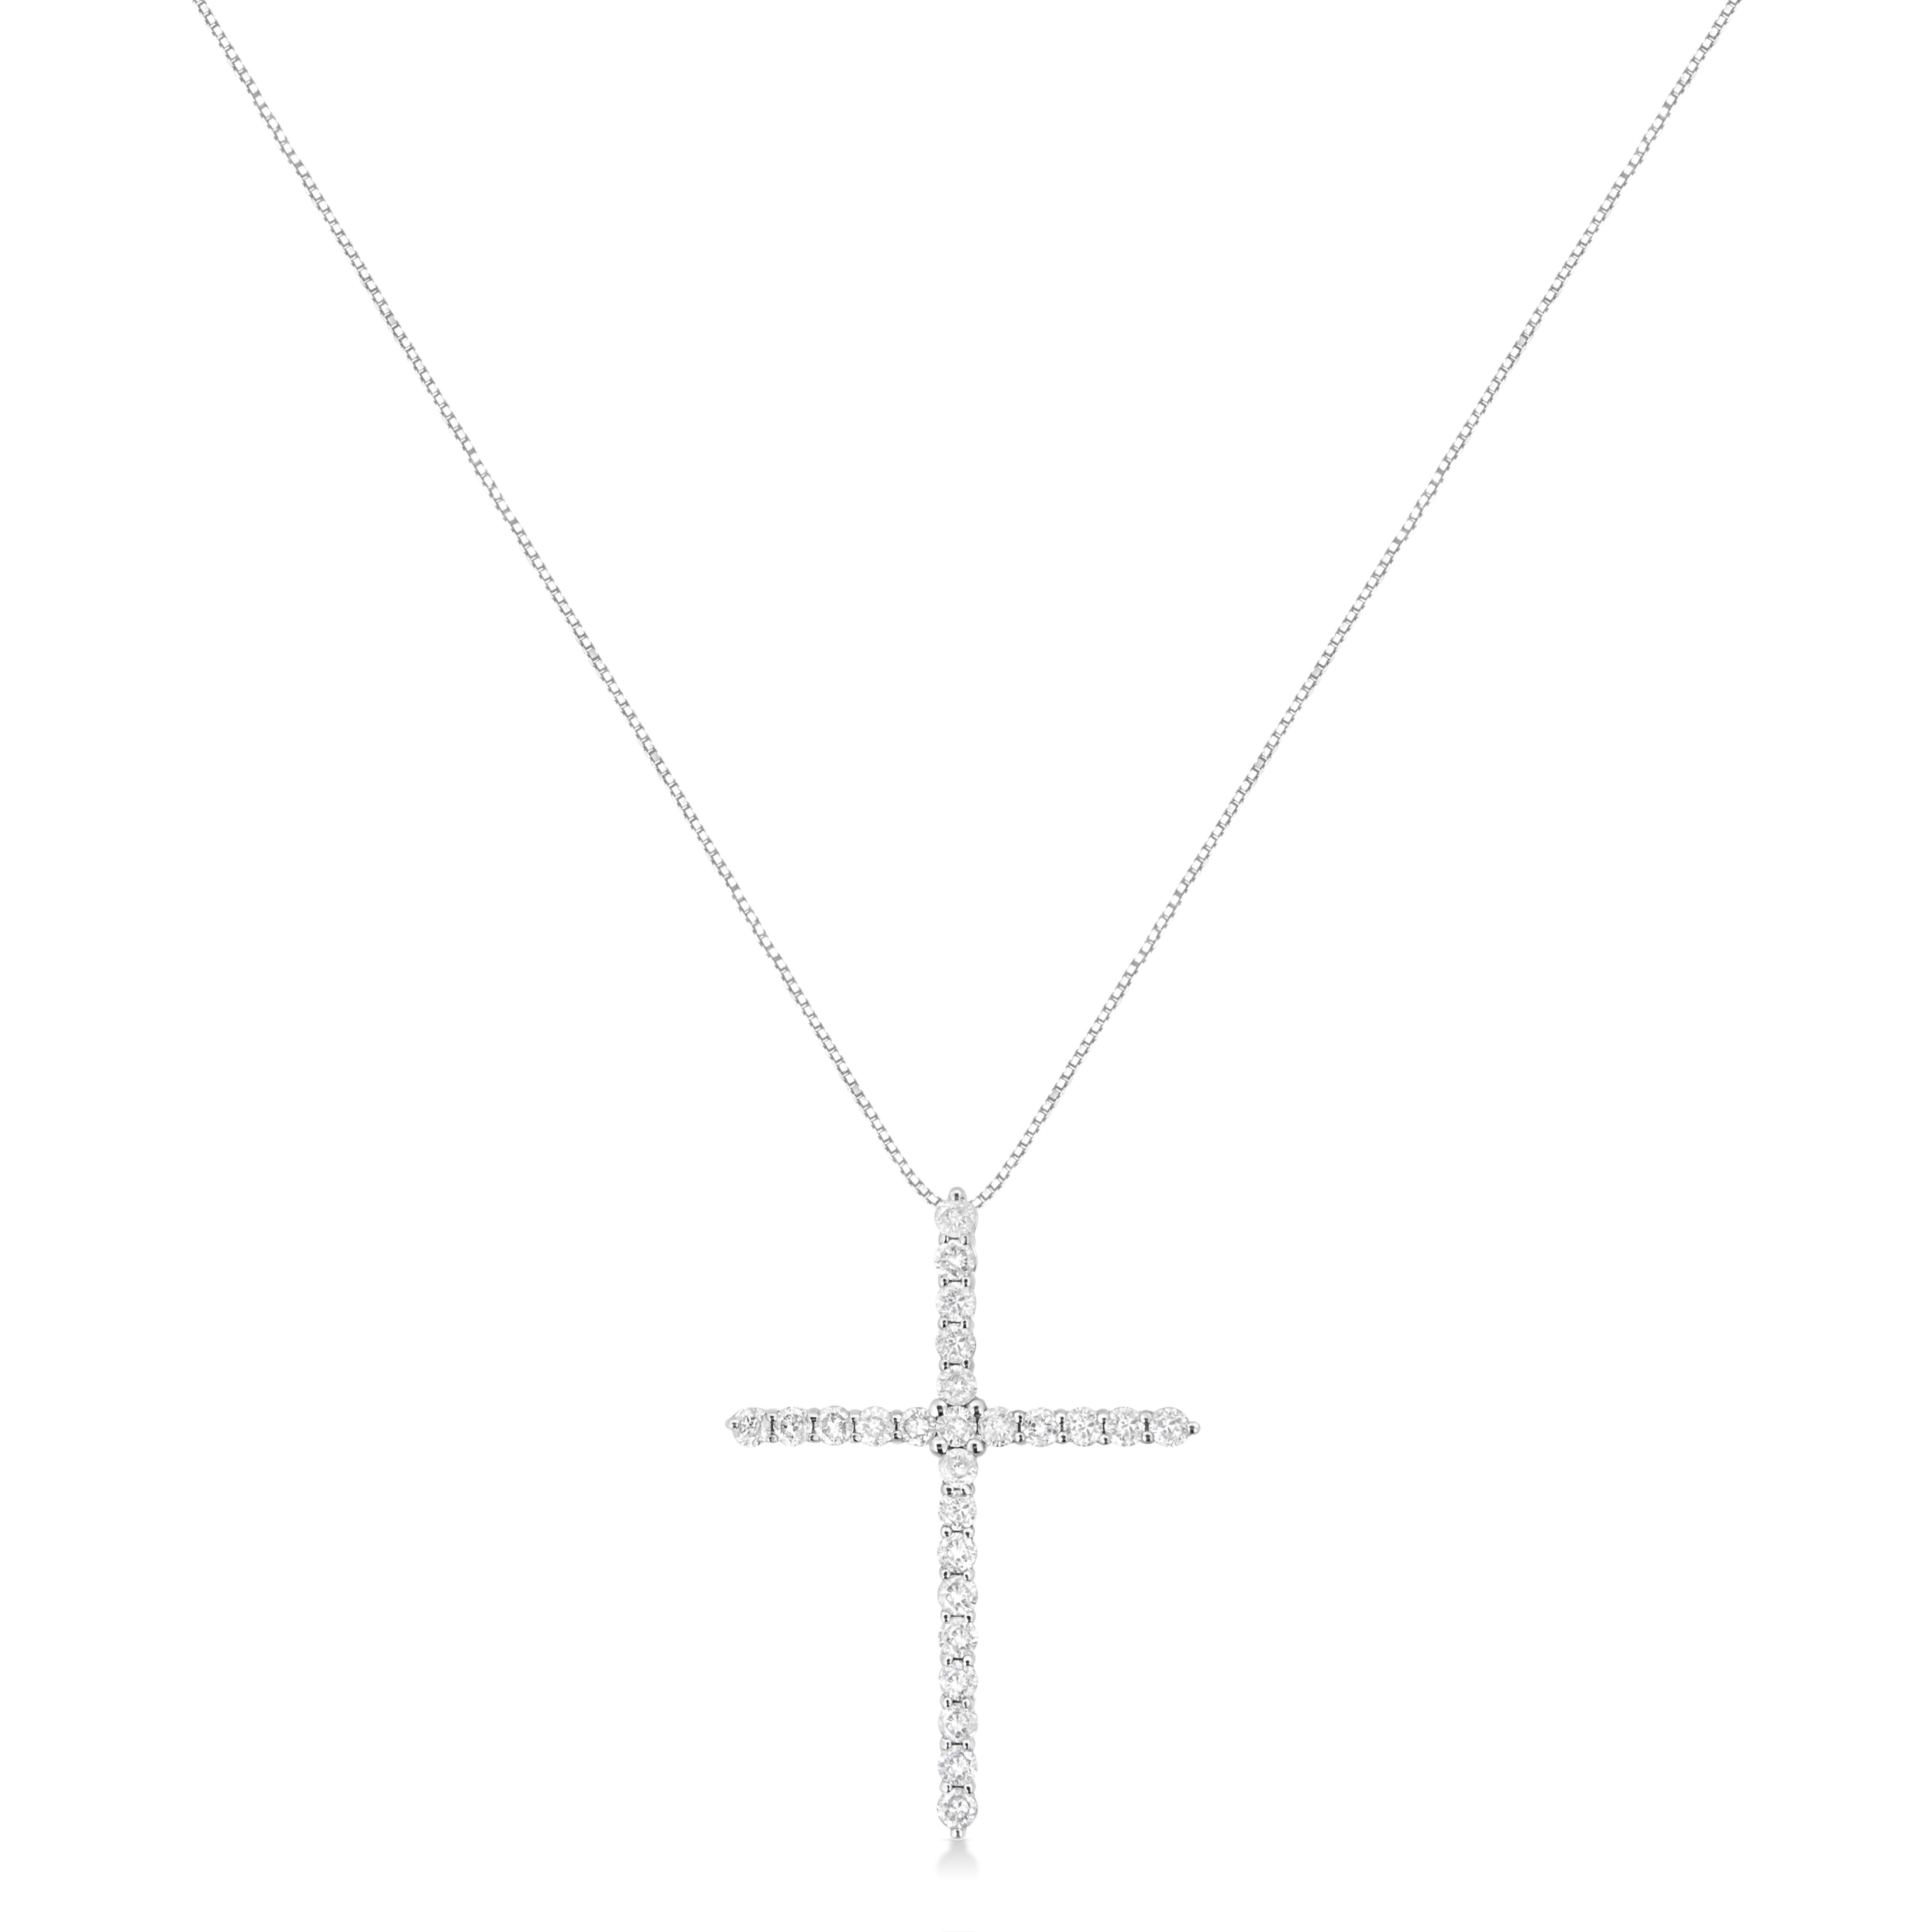 Faith meets fashion in this graceful diamond cross pendant. Crafted in stunning .925 sterling silver, this feminine style crosses two single rows of shimmering prong-set diamonds to create an elegant design. Inspiring with 25 natural, sparkling